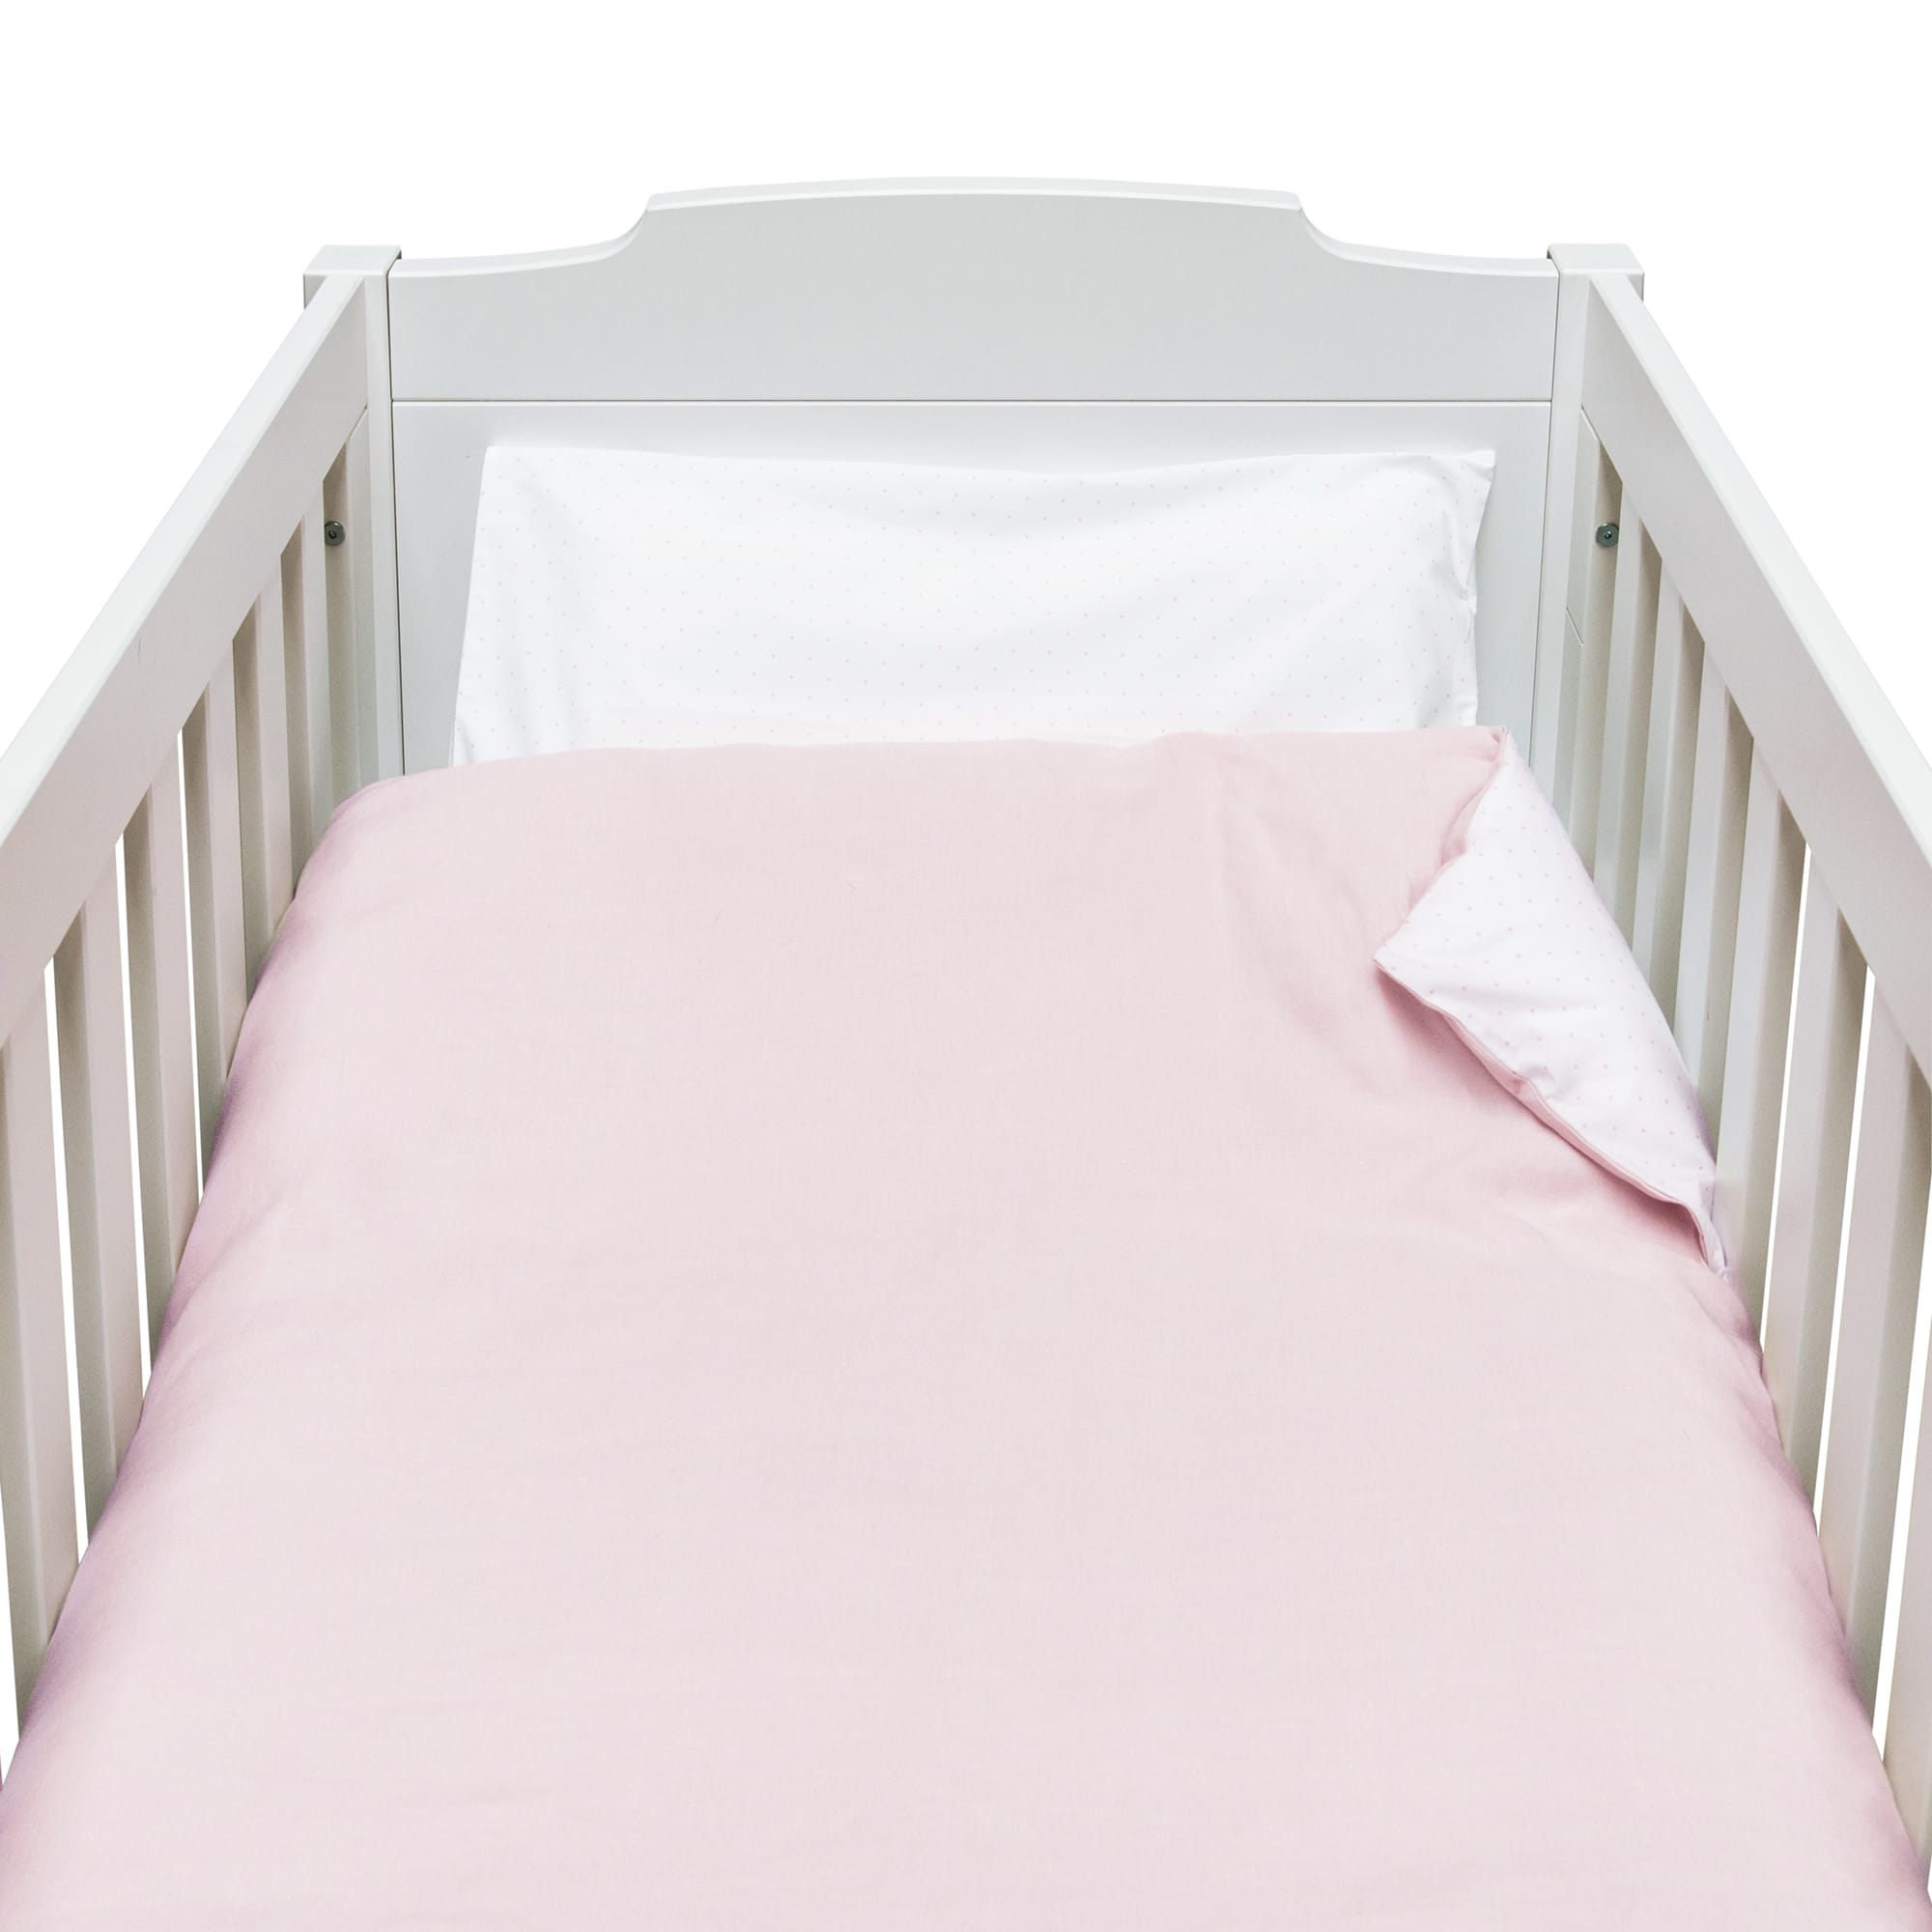 cot bed sheets sale